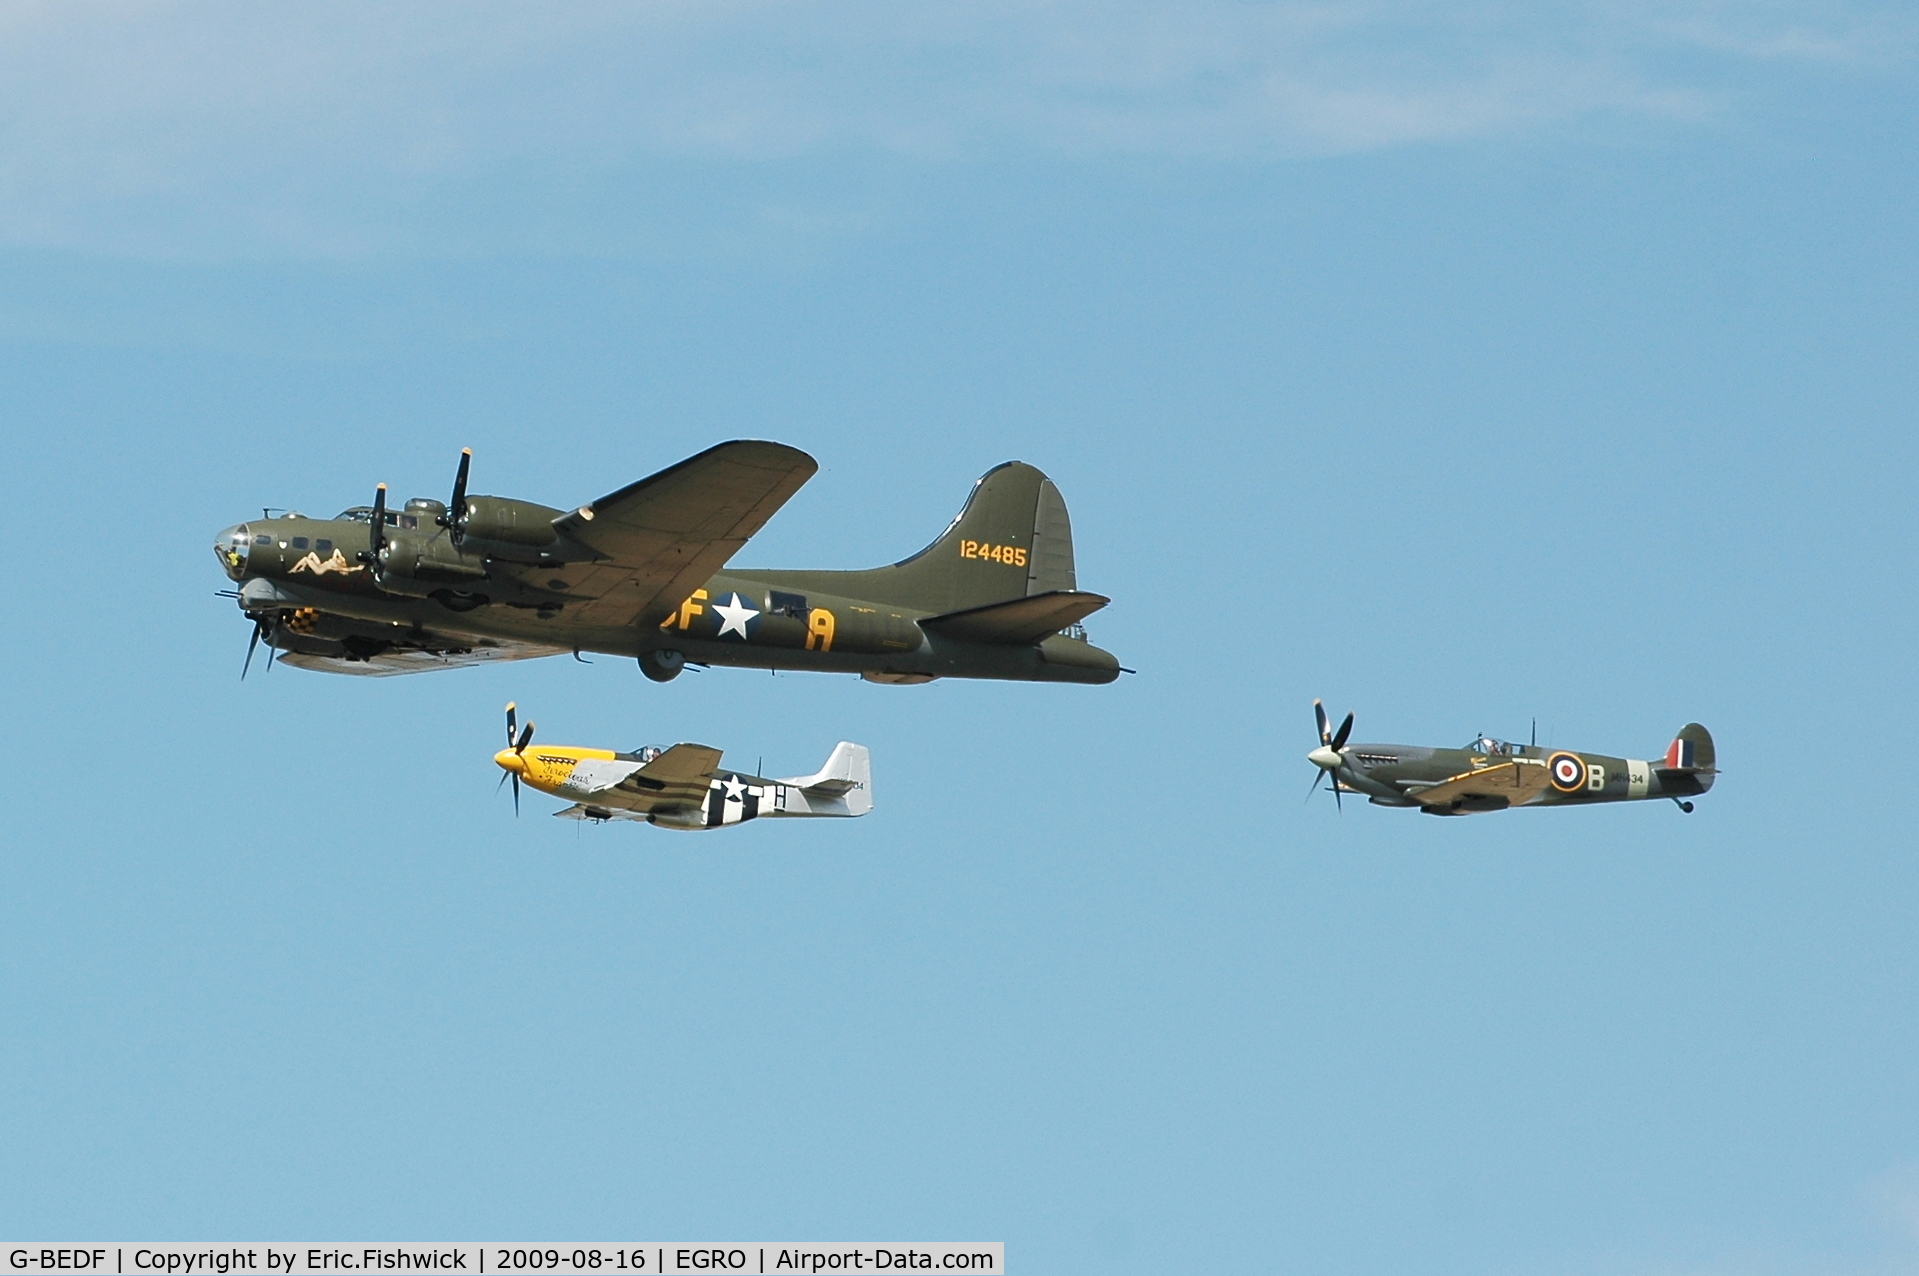 G-BEDF, 1944 Boeing B-17G Flying Fortress C/N 8693, 45. B17 + Mustang + Spitfire at Heart Air Display, Rougham Airfield Aug 09